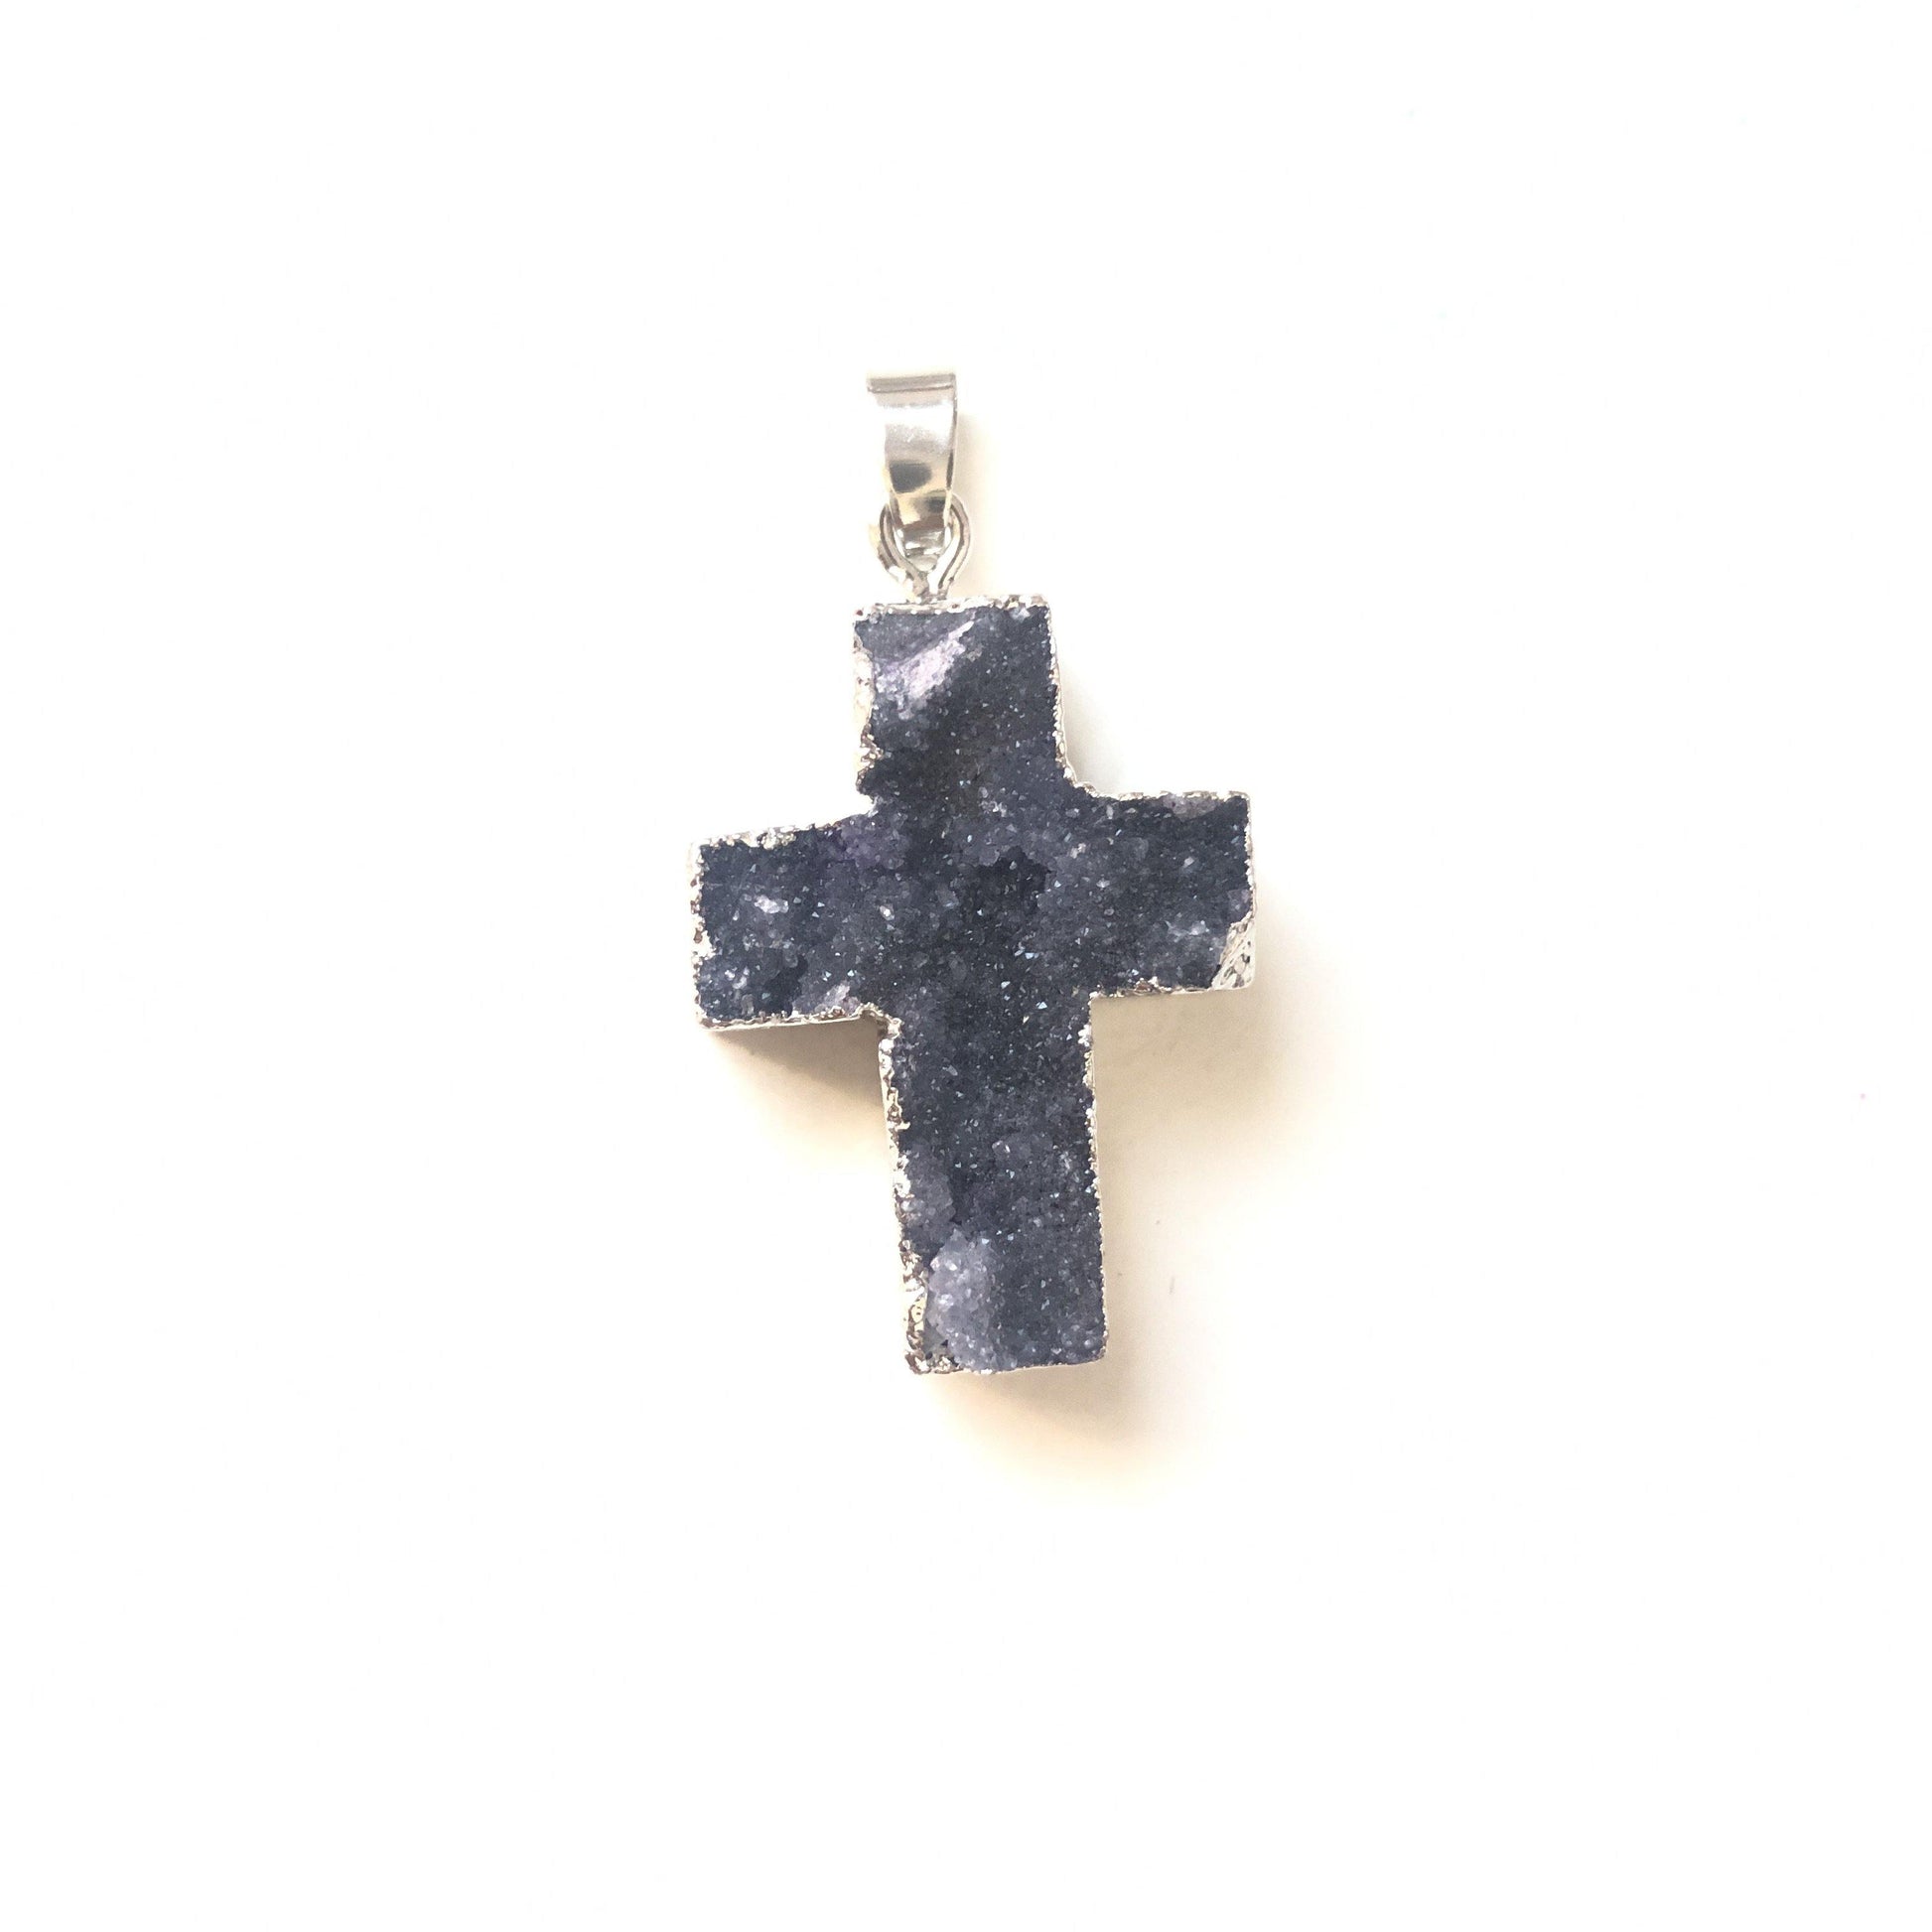 5pcs/lot 30x22mm Cross Natural Agate Druzy Charm-Silver Black on Silver Stone Charms Charms Beads Beyond